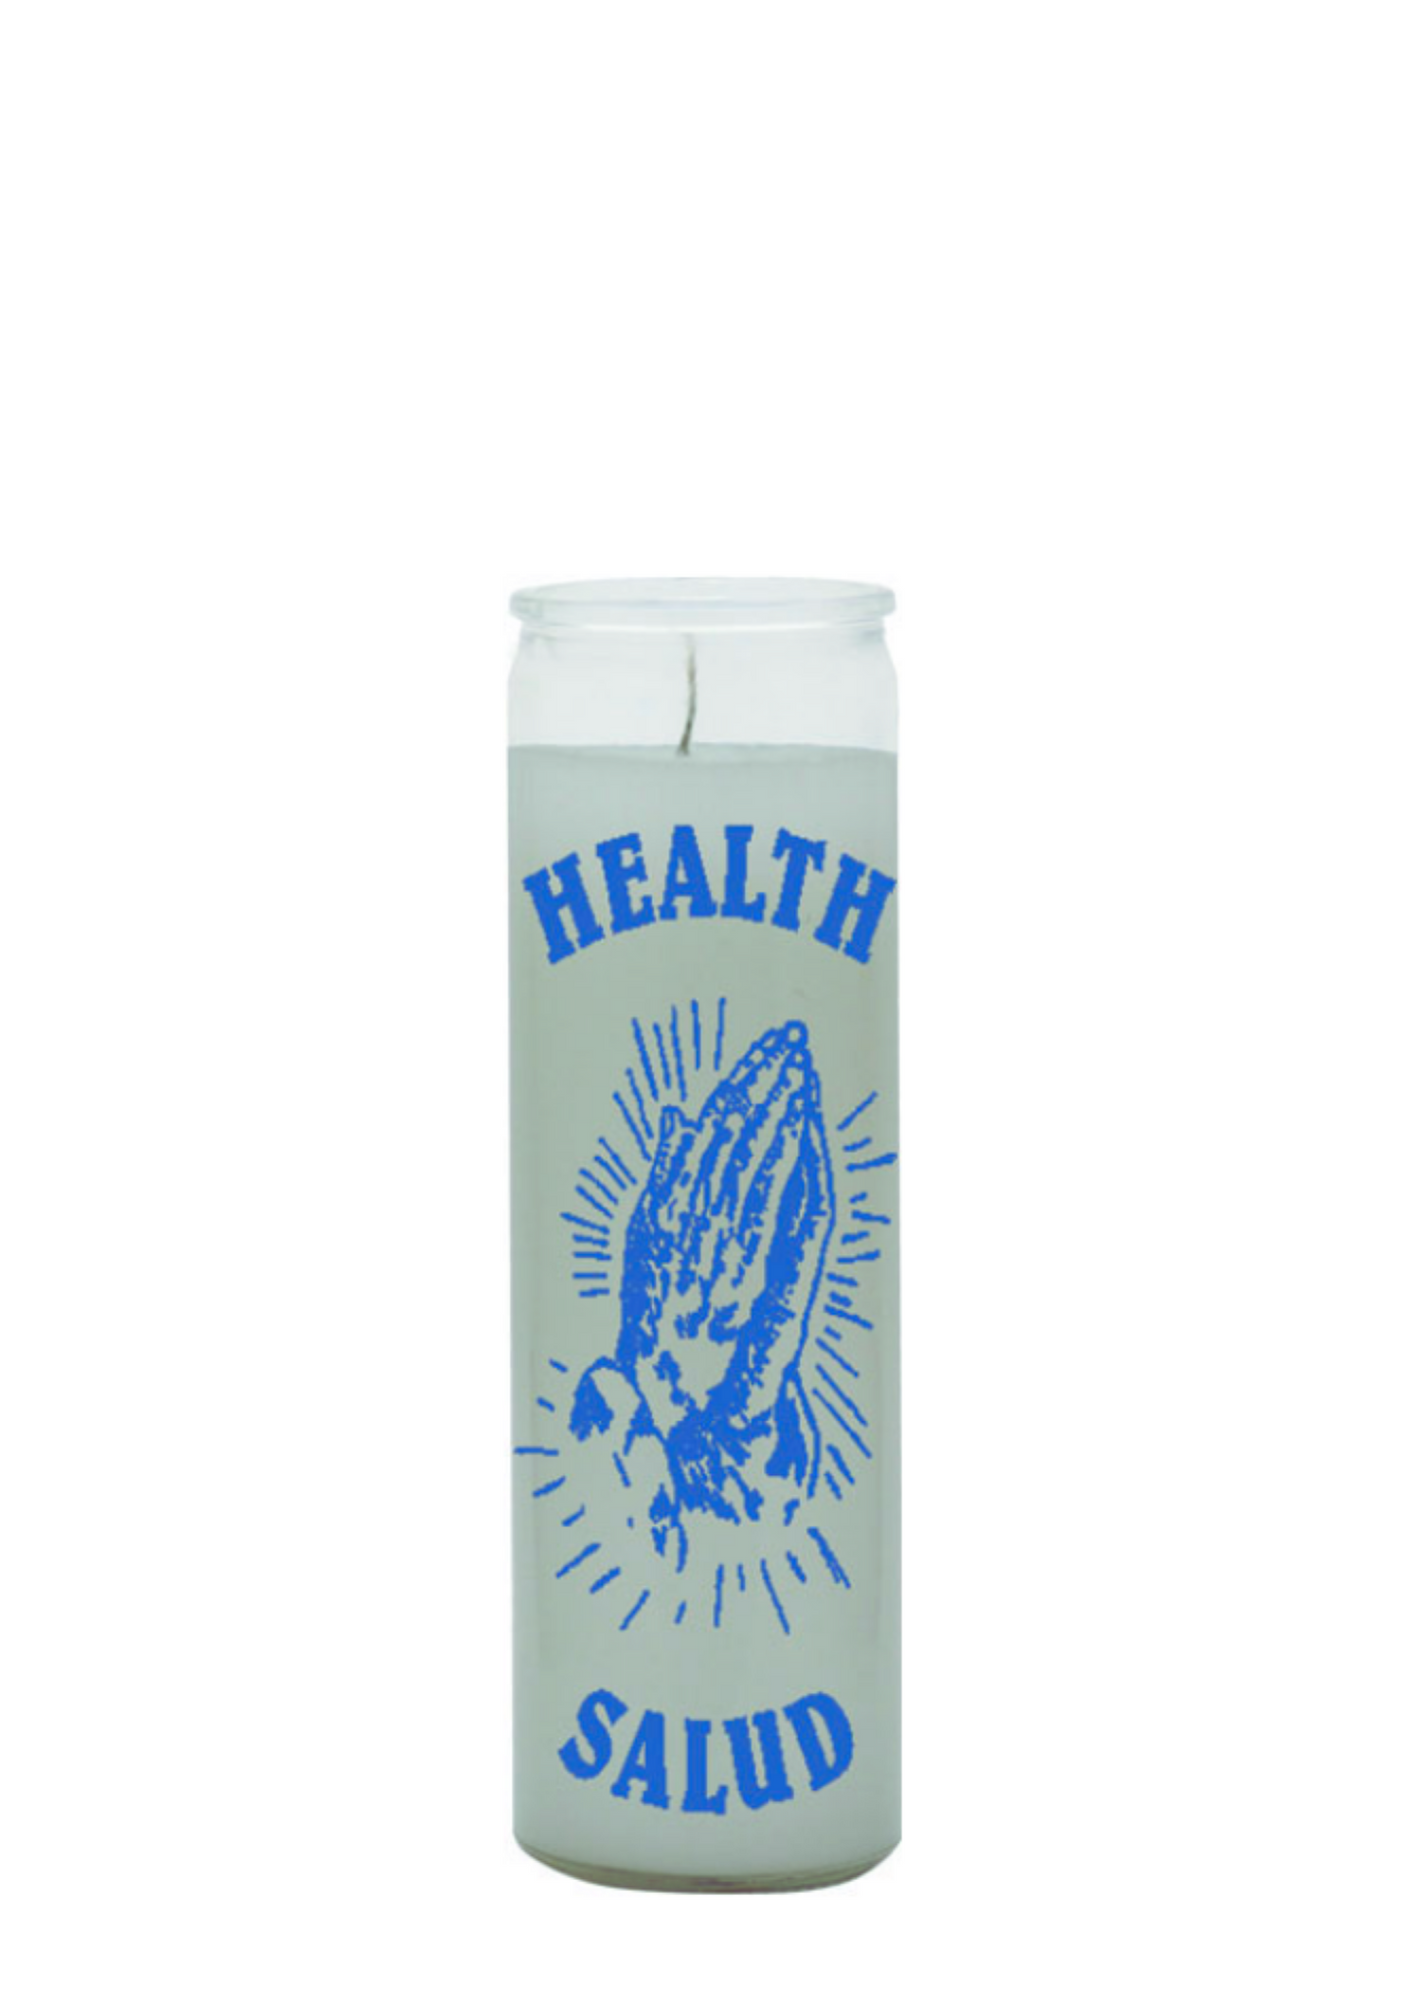 Health / salud (white) 1 color 7 day candle